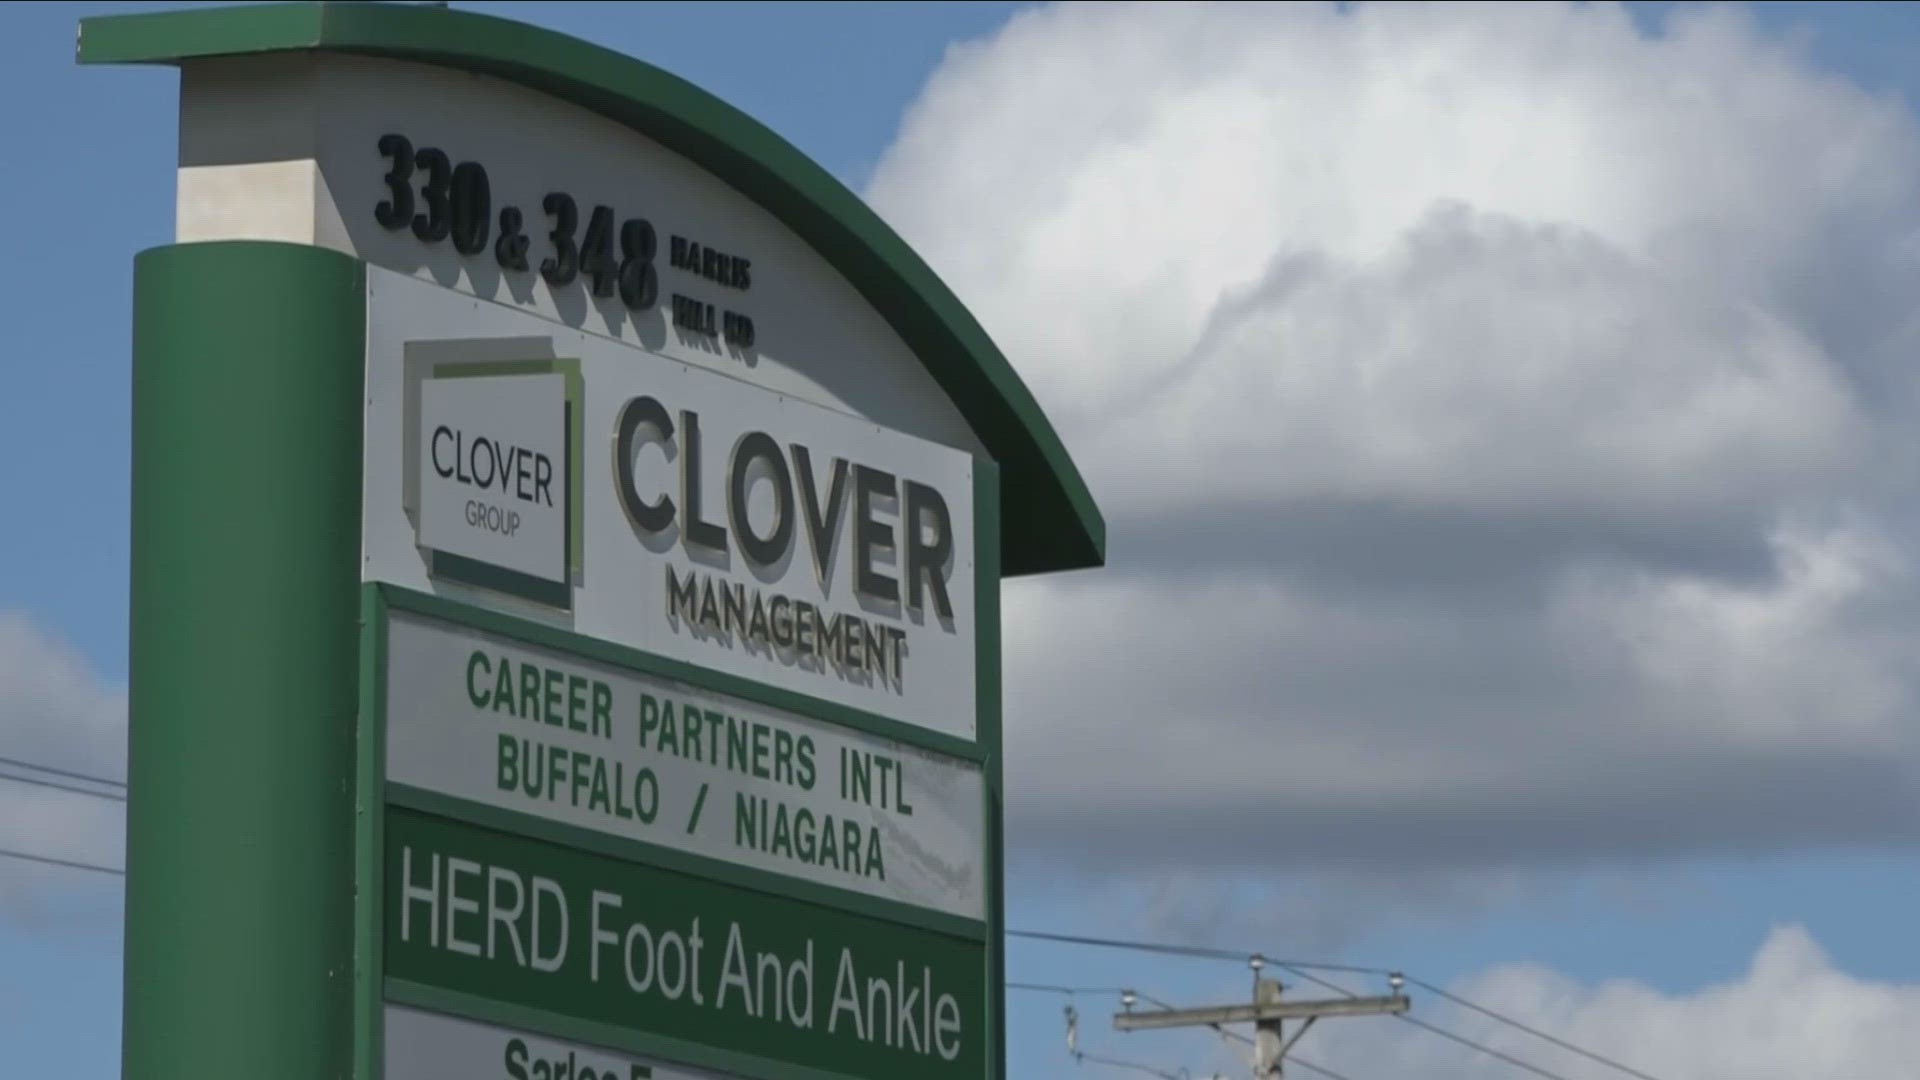 A Buffalo Common Councilmember is advocating for Clover Group CEO Michael Joseph to be removed from the Roswell and AKG boards.